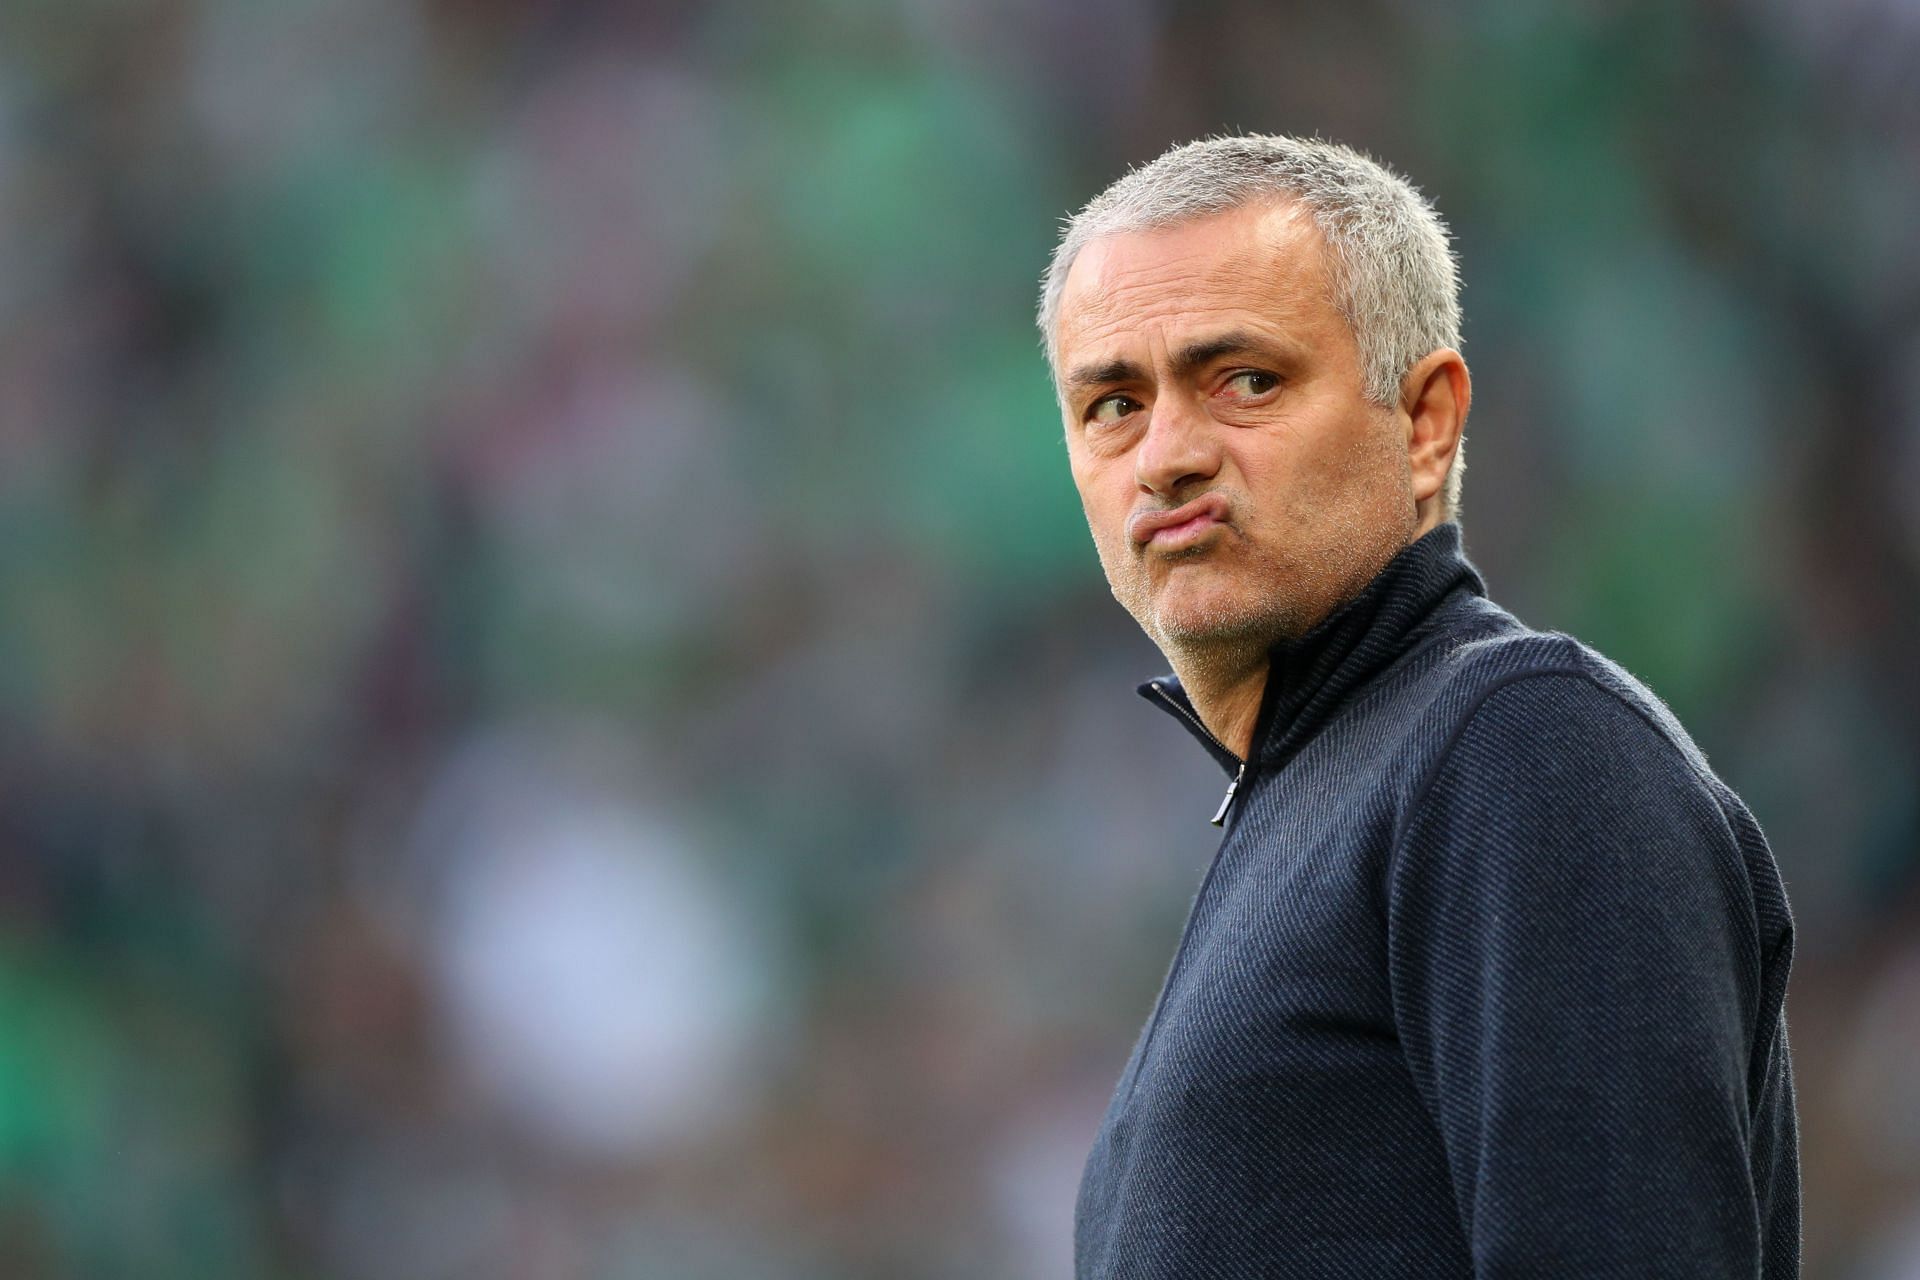 Jose Mourinho will look back at some of his signings in utter dismay